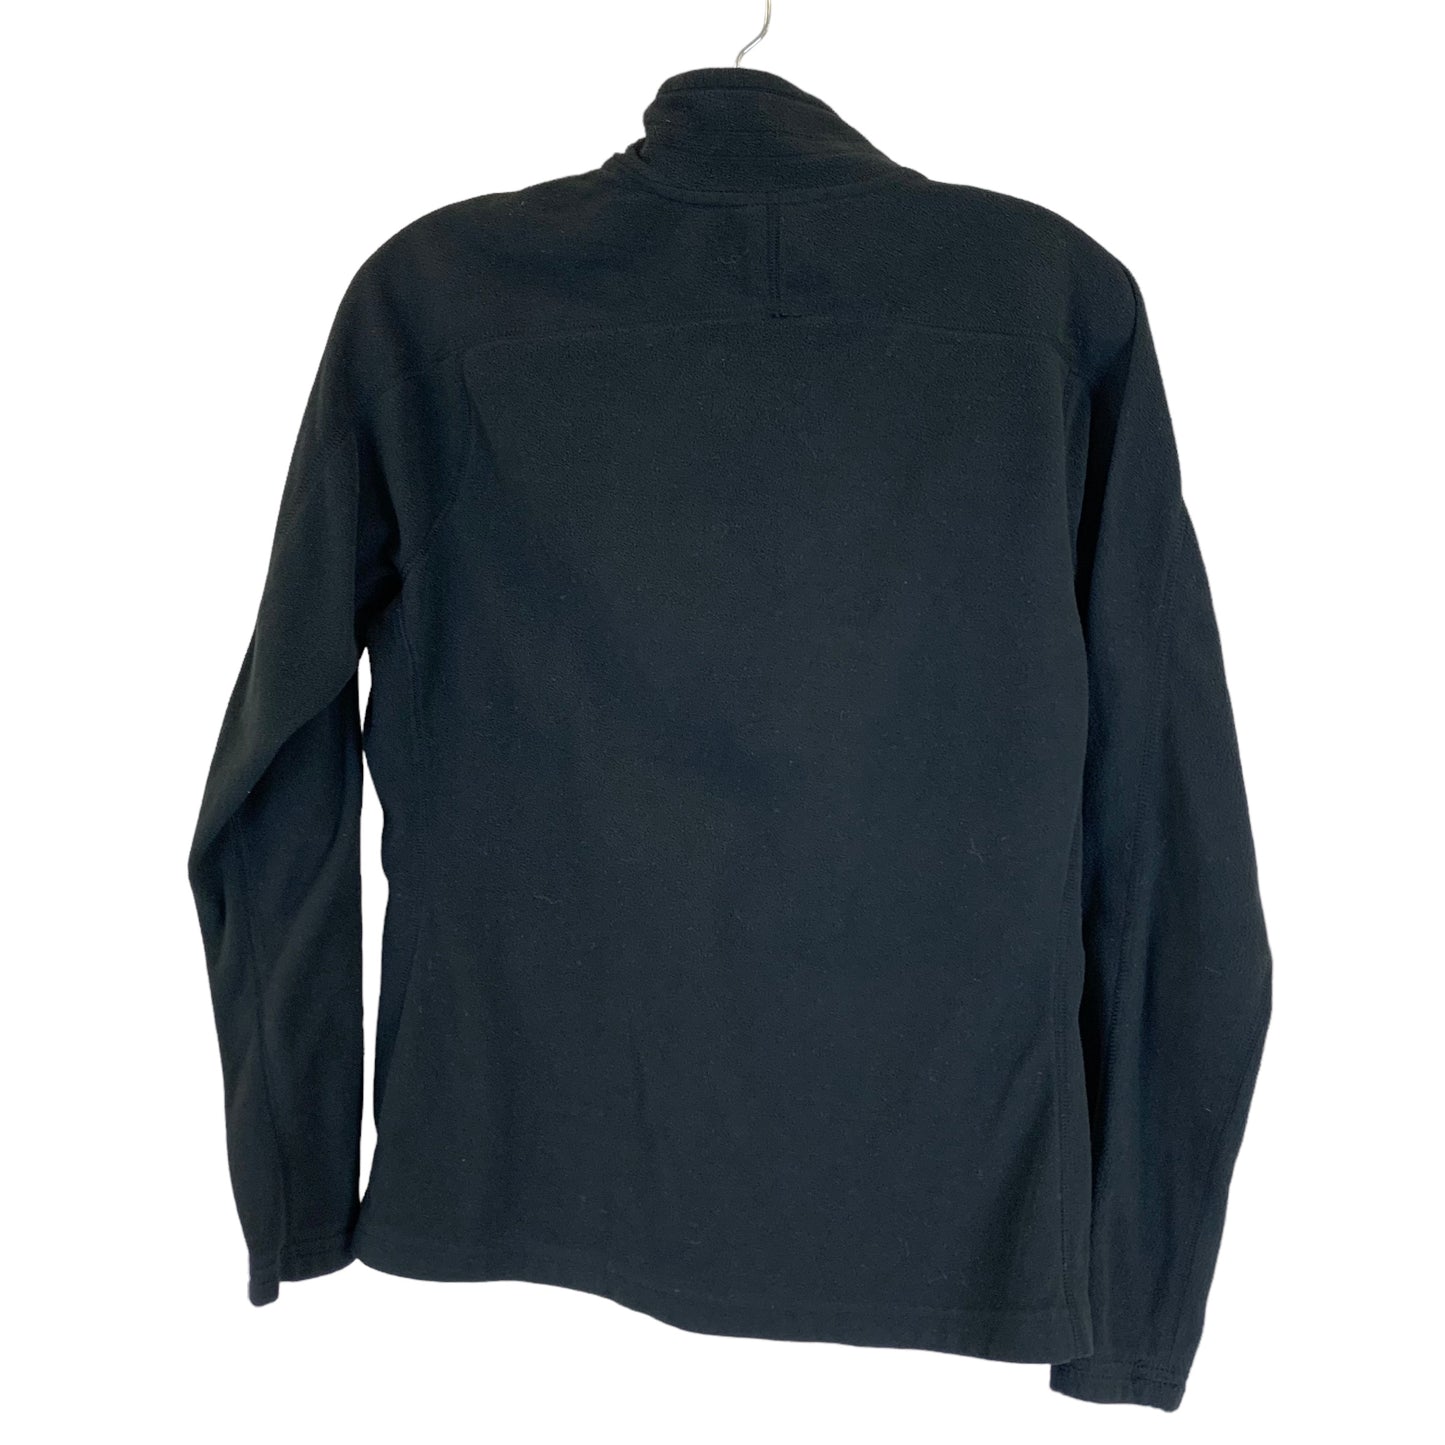 Athletic Top Long Sleeve Collar By The North Face  Size: M